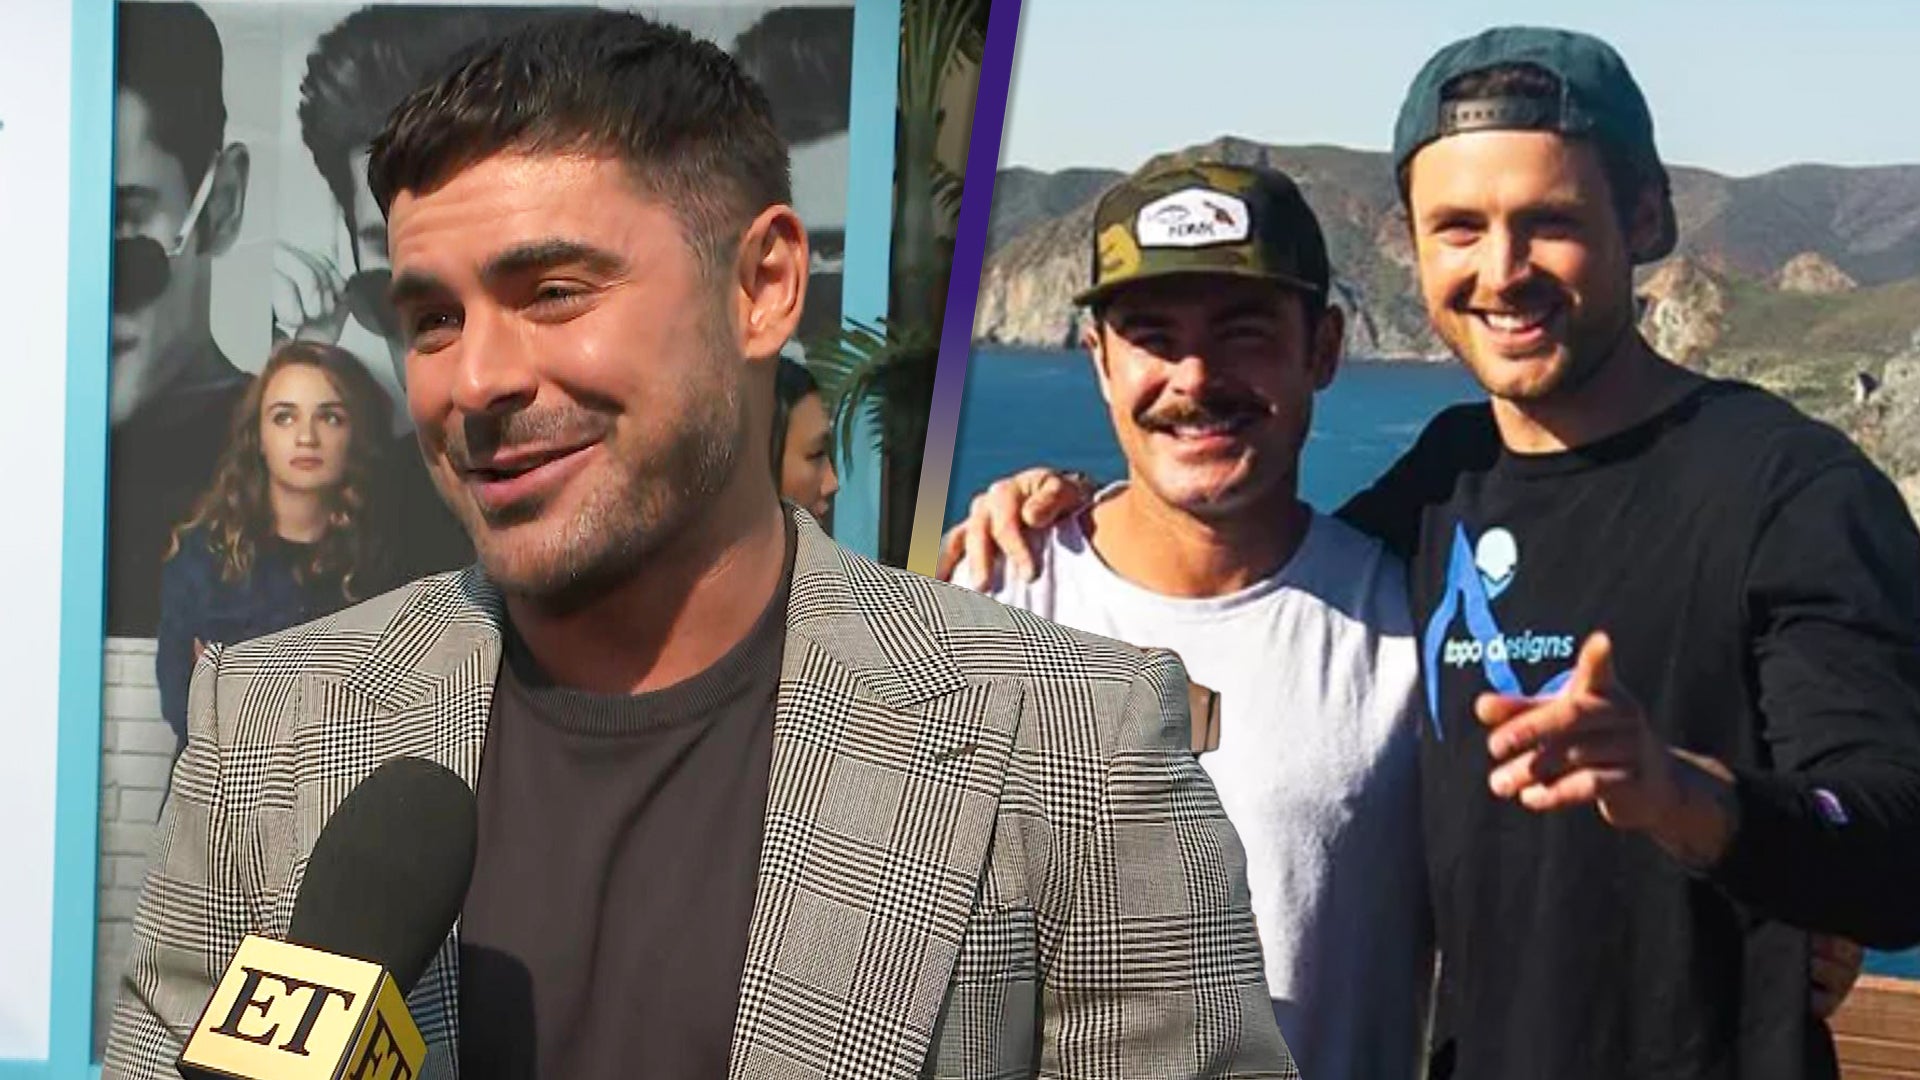 Zac Efron Shares Why He Thinks His Brother Dylan Might Win 'The Traitors' Season 3 (Exclusive)